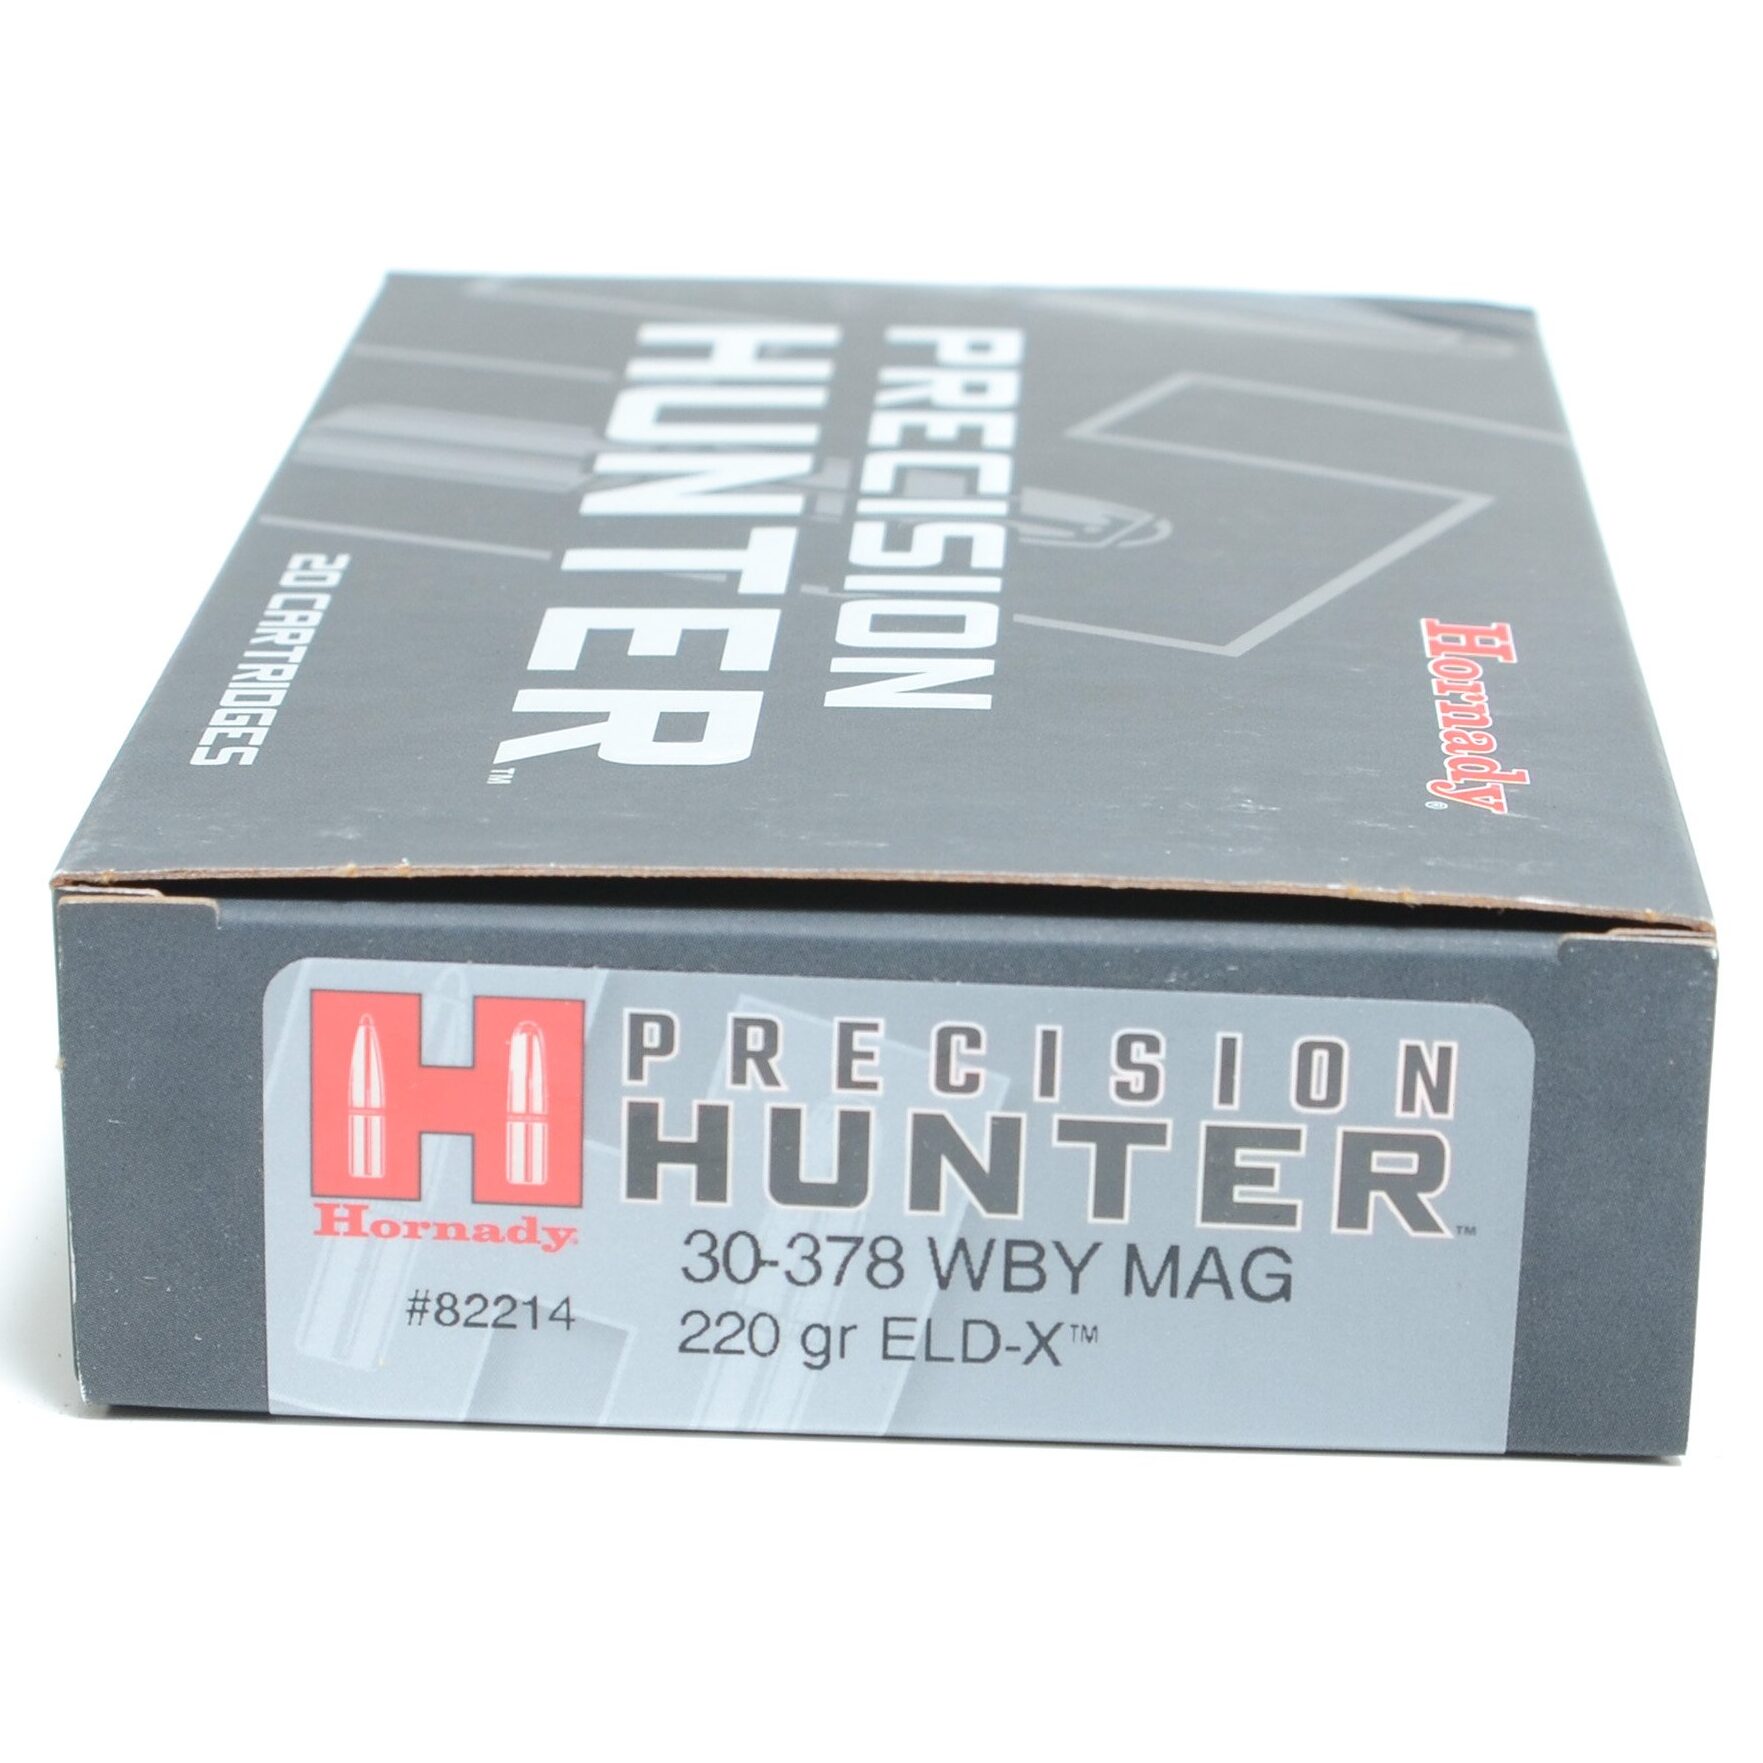 Hornady 30-378 Wby Mag 220 Grain ELD-X (Extremly Low Drag) Hunting Ammunition (20 Rounds)